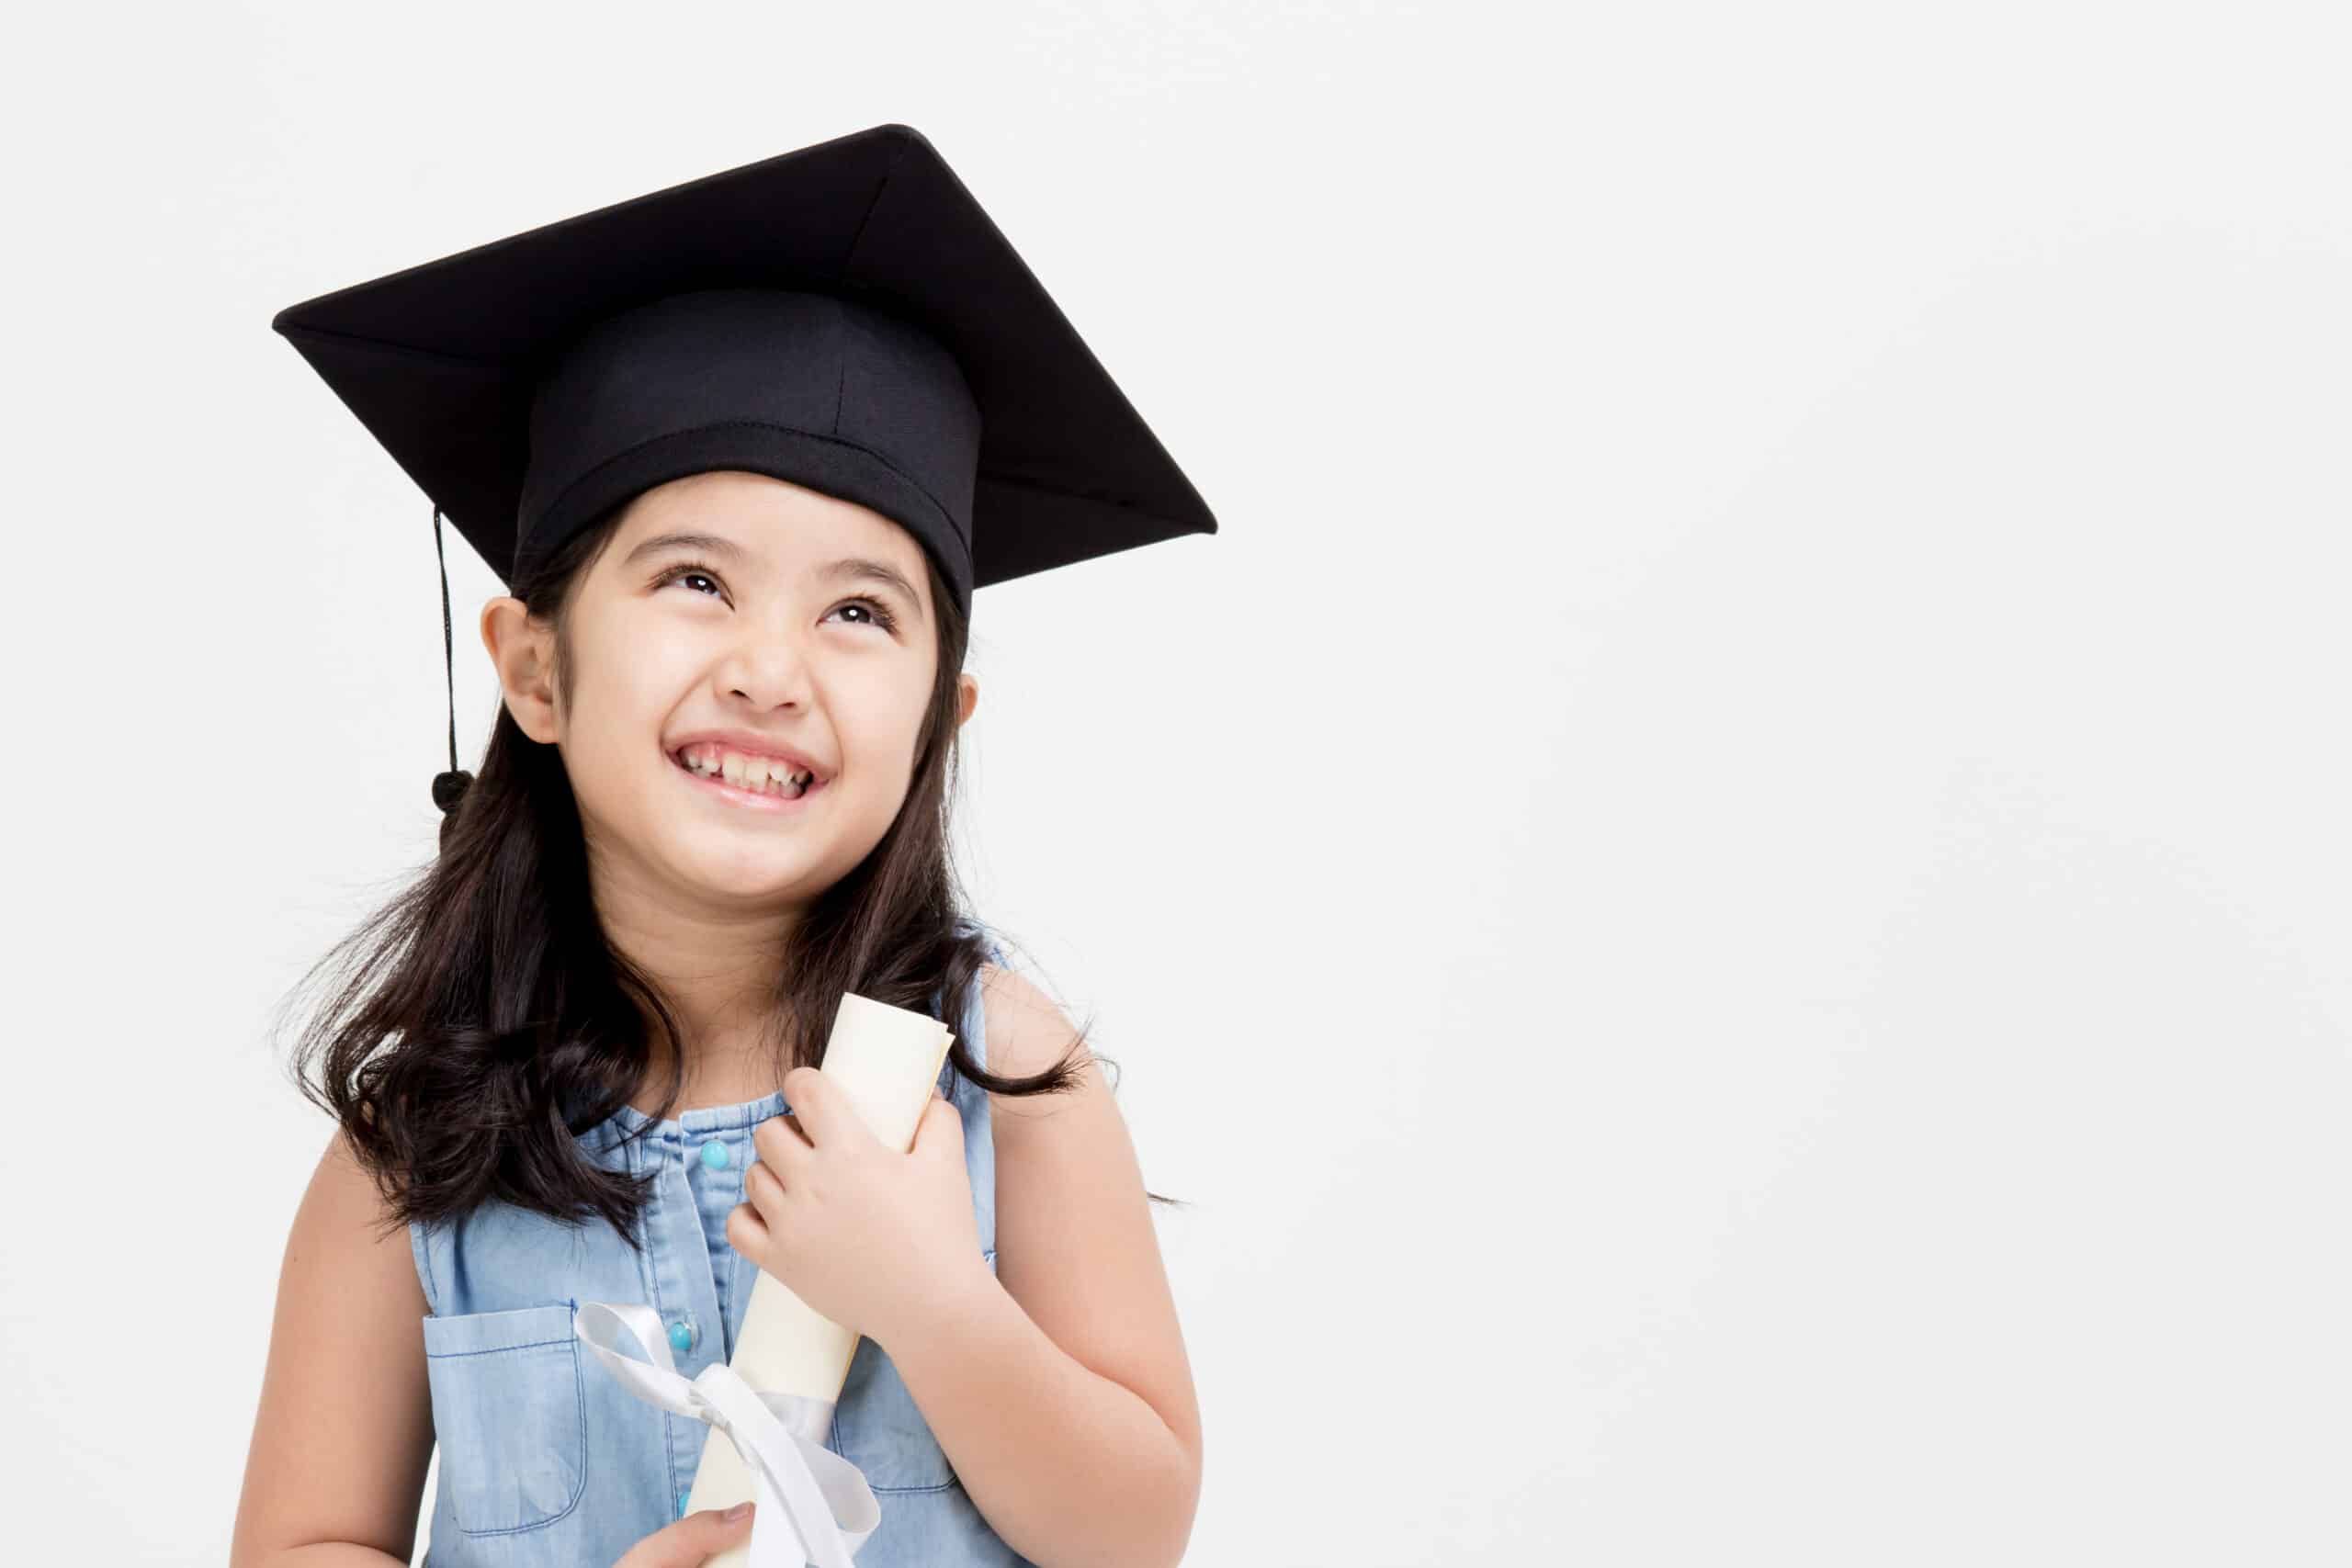 A girl with a black graduation cap holds a rolled up paper and smiles while looking dreamily up into the sky